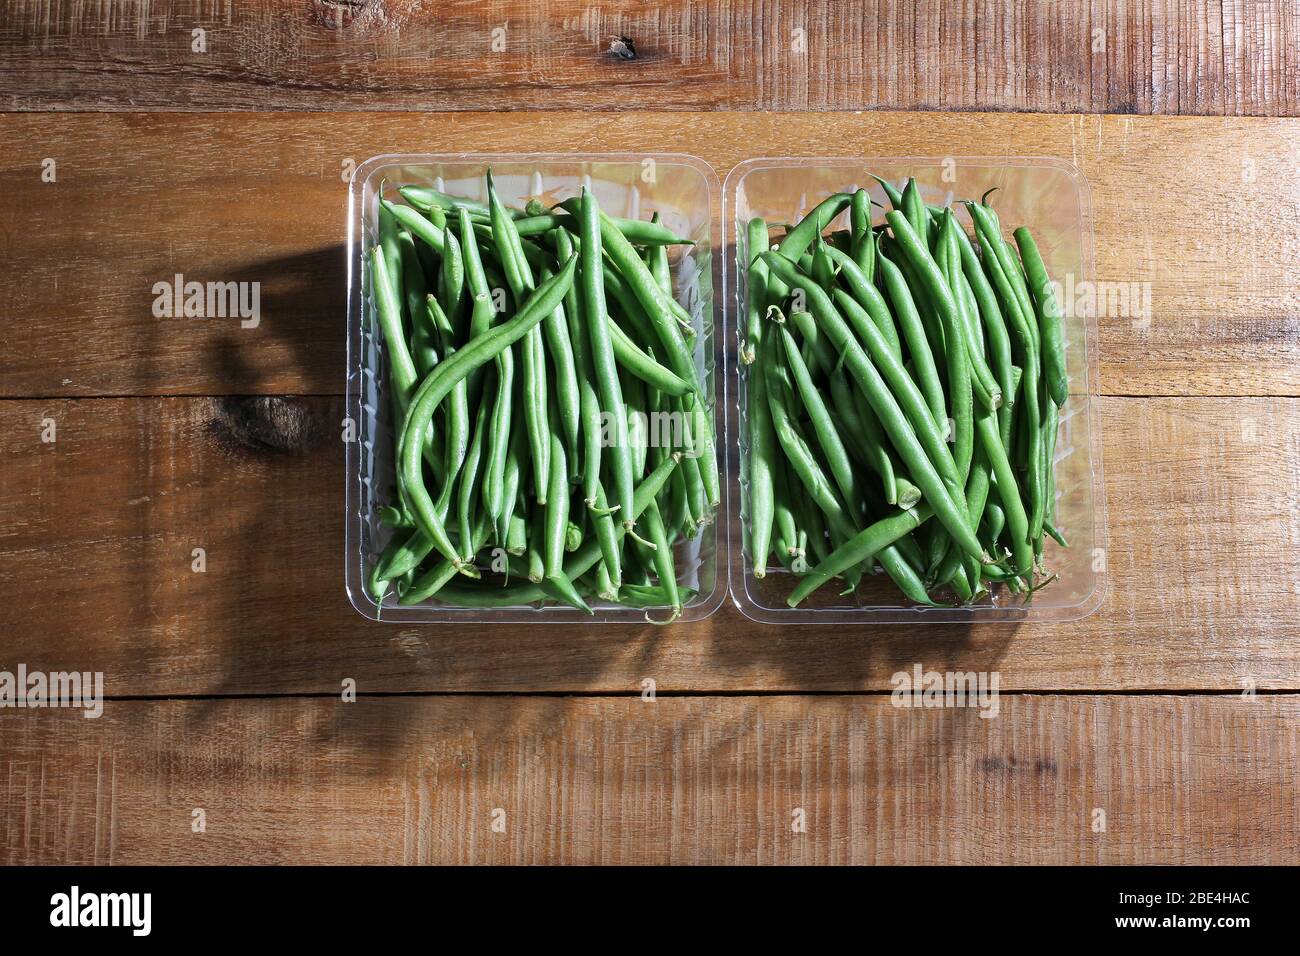 French Beans on Wooden Background Stock Photo